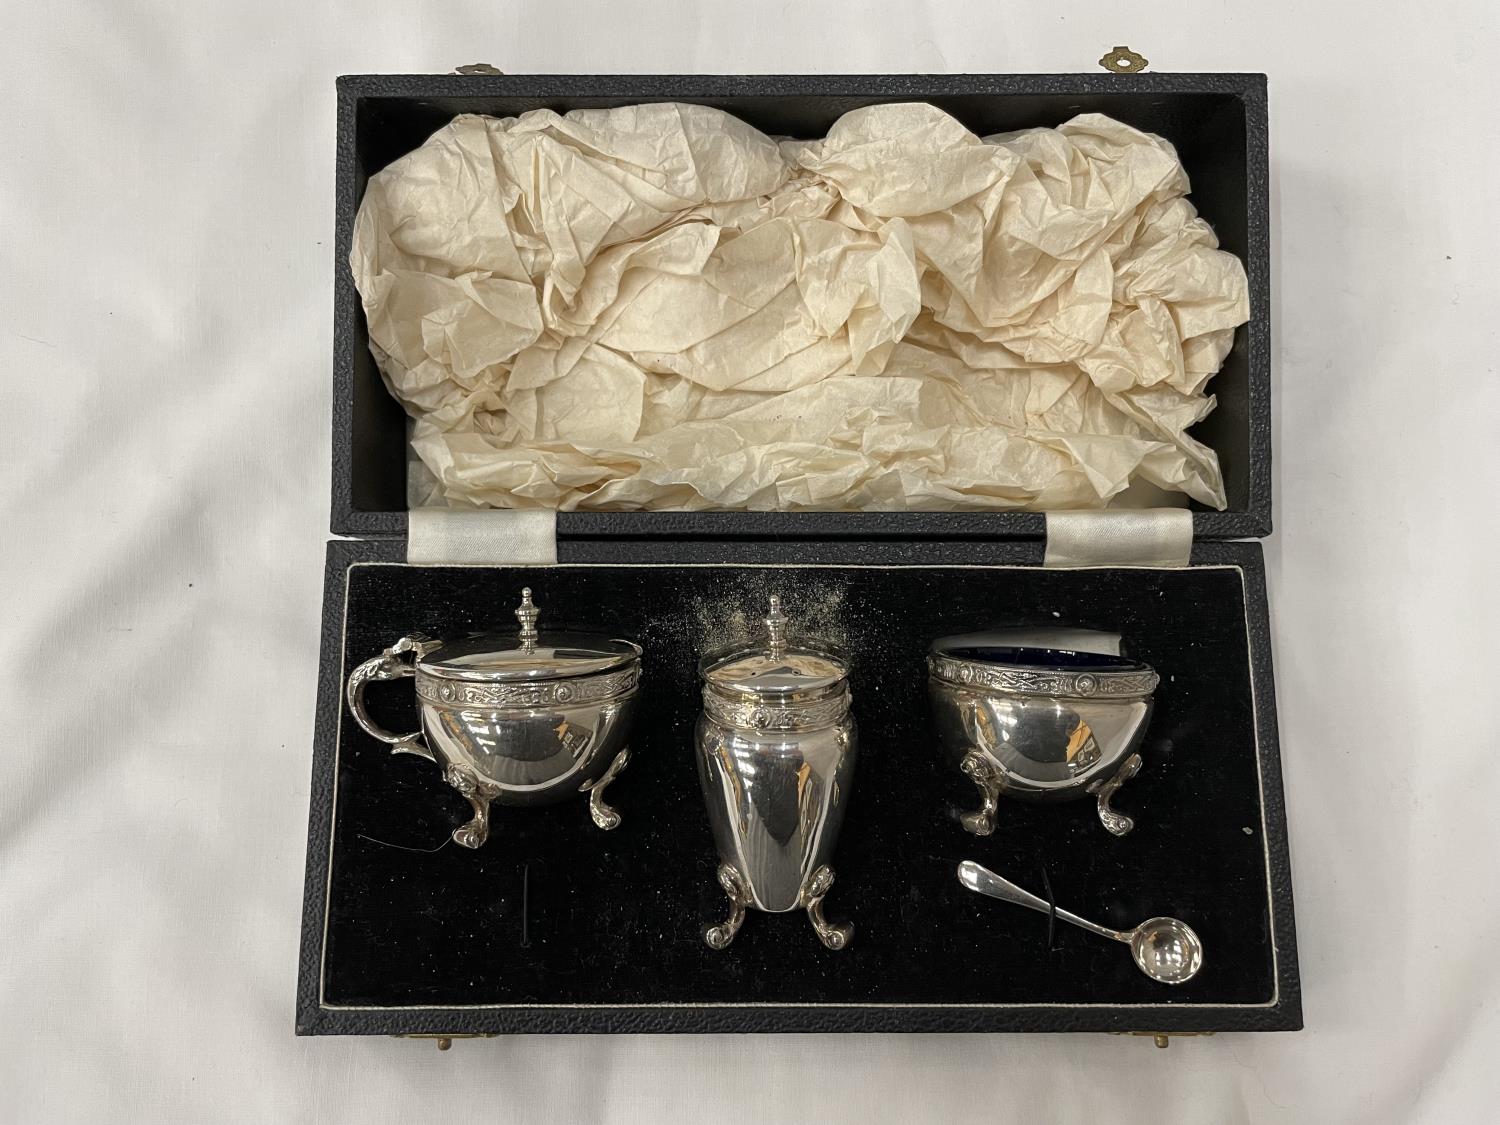 A BOXED HALLMARKED BIRMINGHAM SILVER CRUET SET WITH BLUE GLASS LINERS (ONE SPOON MISSING) GROSS